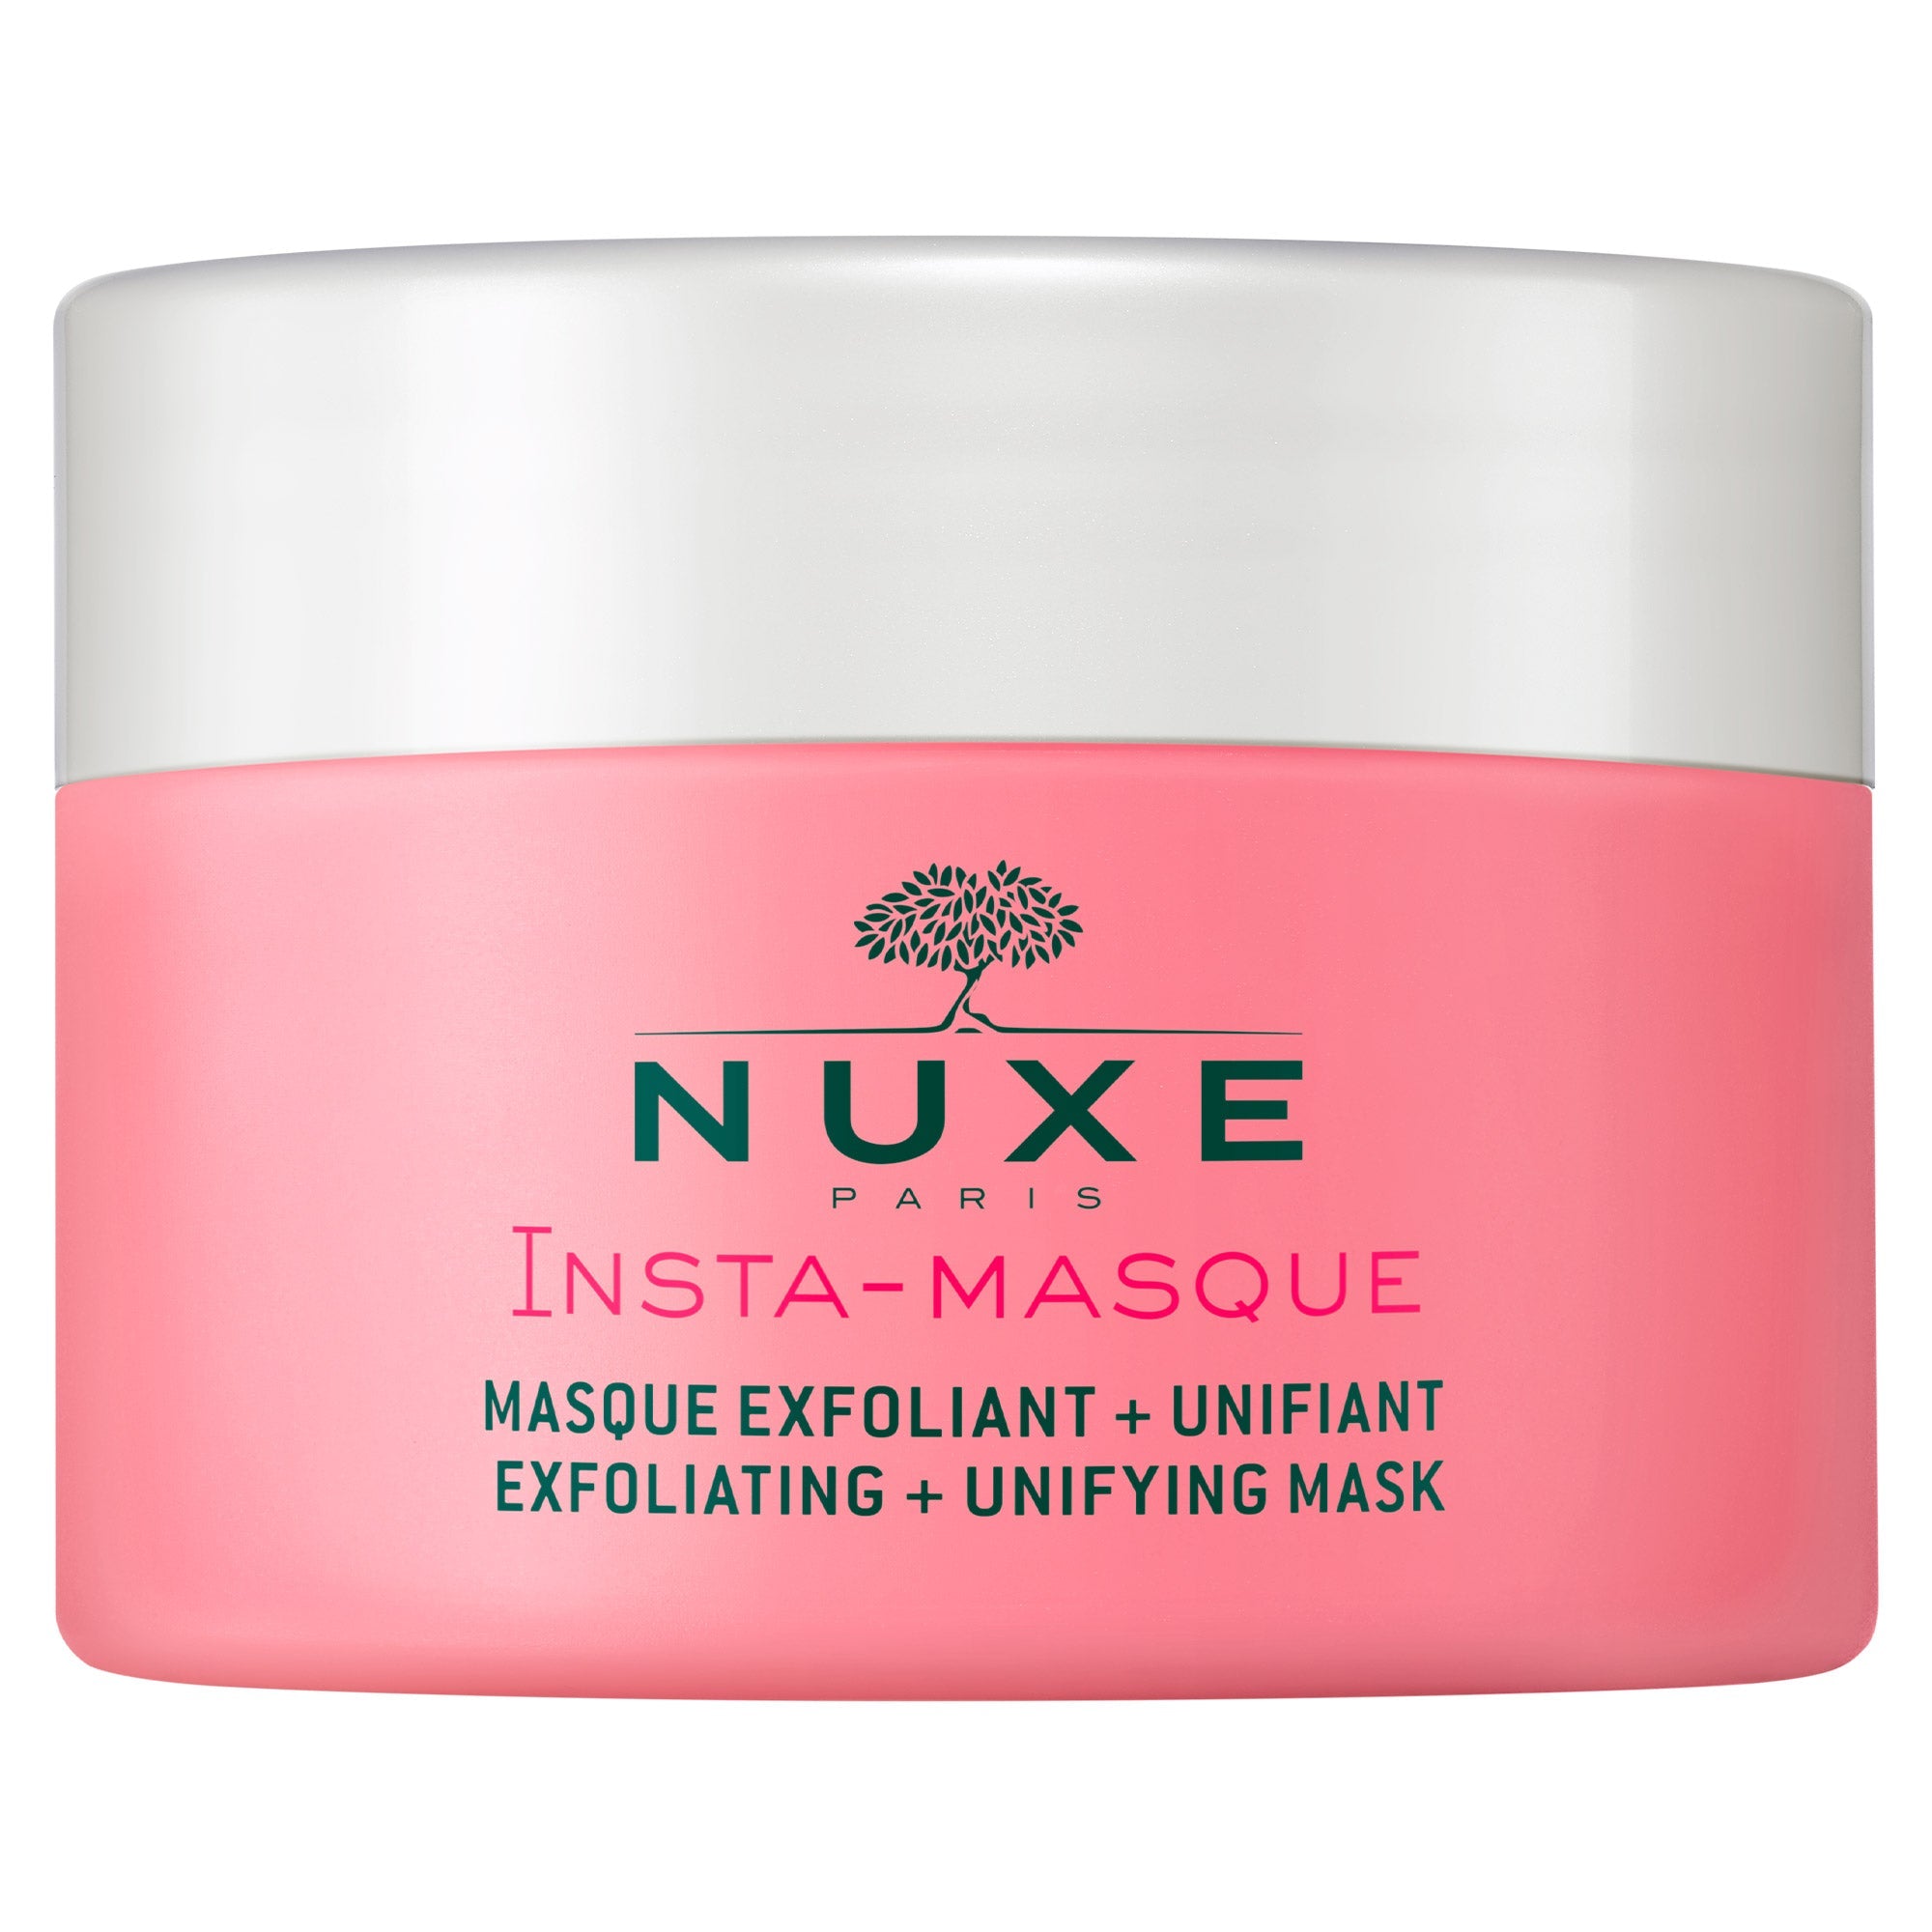 Nuxe Insta-Masque Exfoliating + Unifying Mask 50 ml